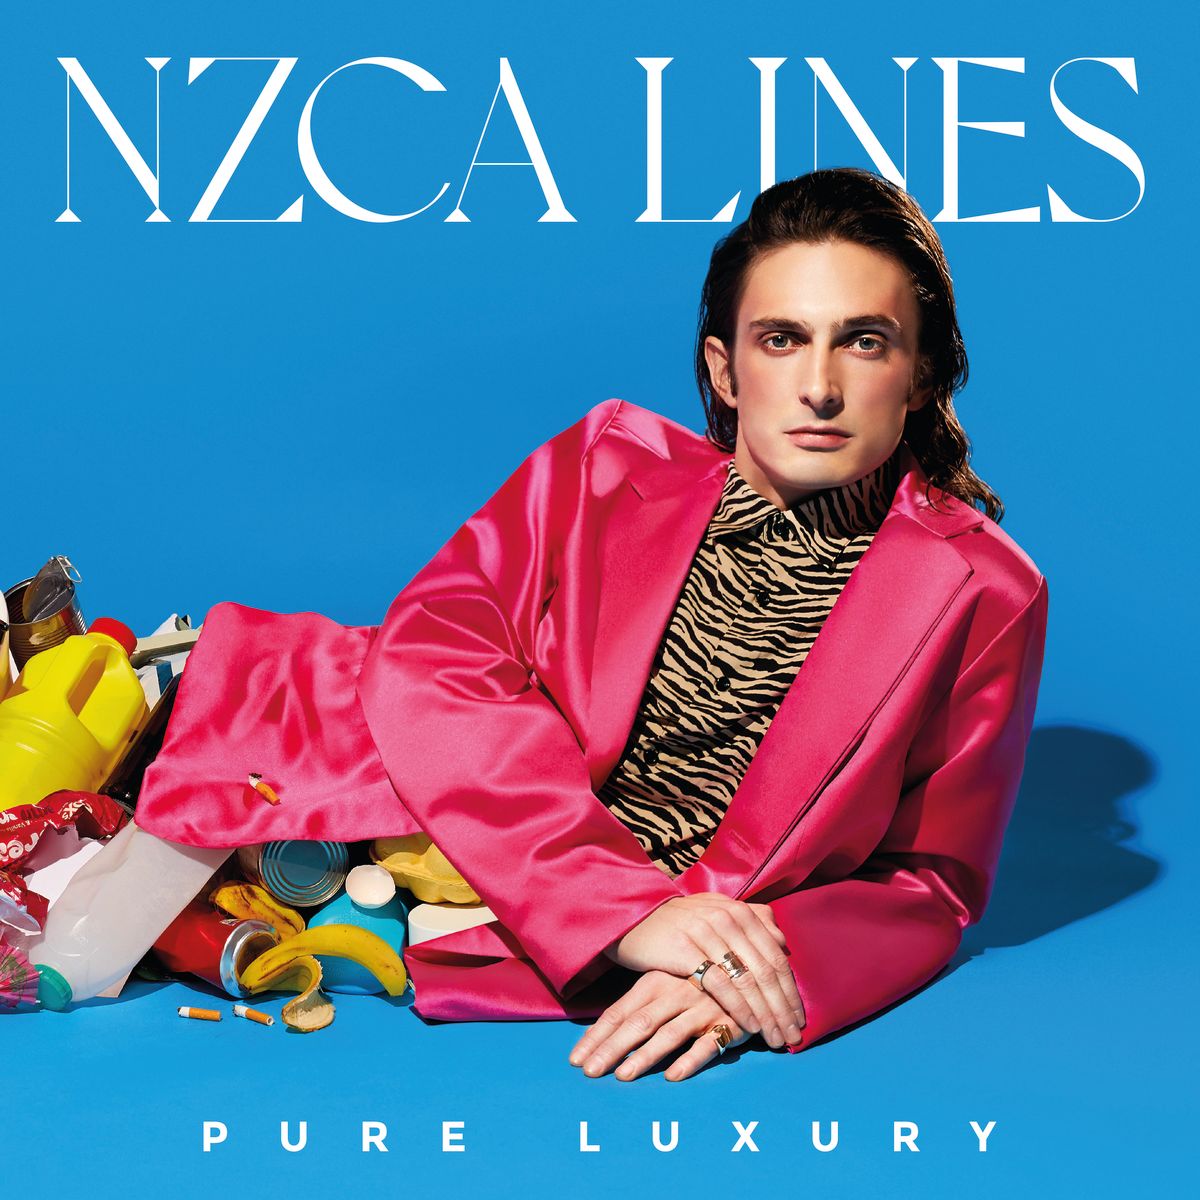 Pure Luxury by NZCA LINES album review Adam Fink, the full-length is out today via Memphis Industries and streaming services